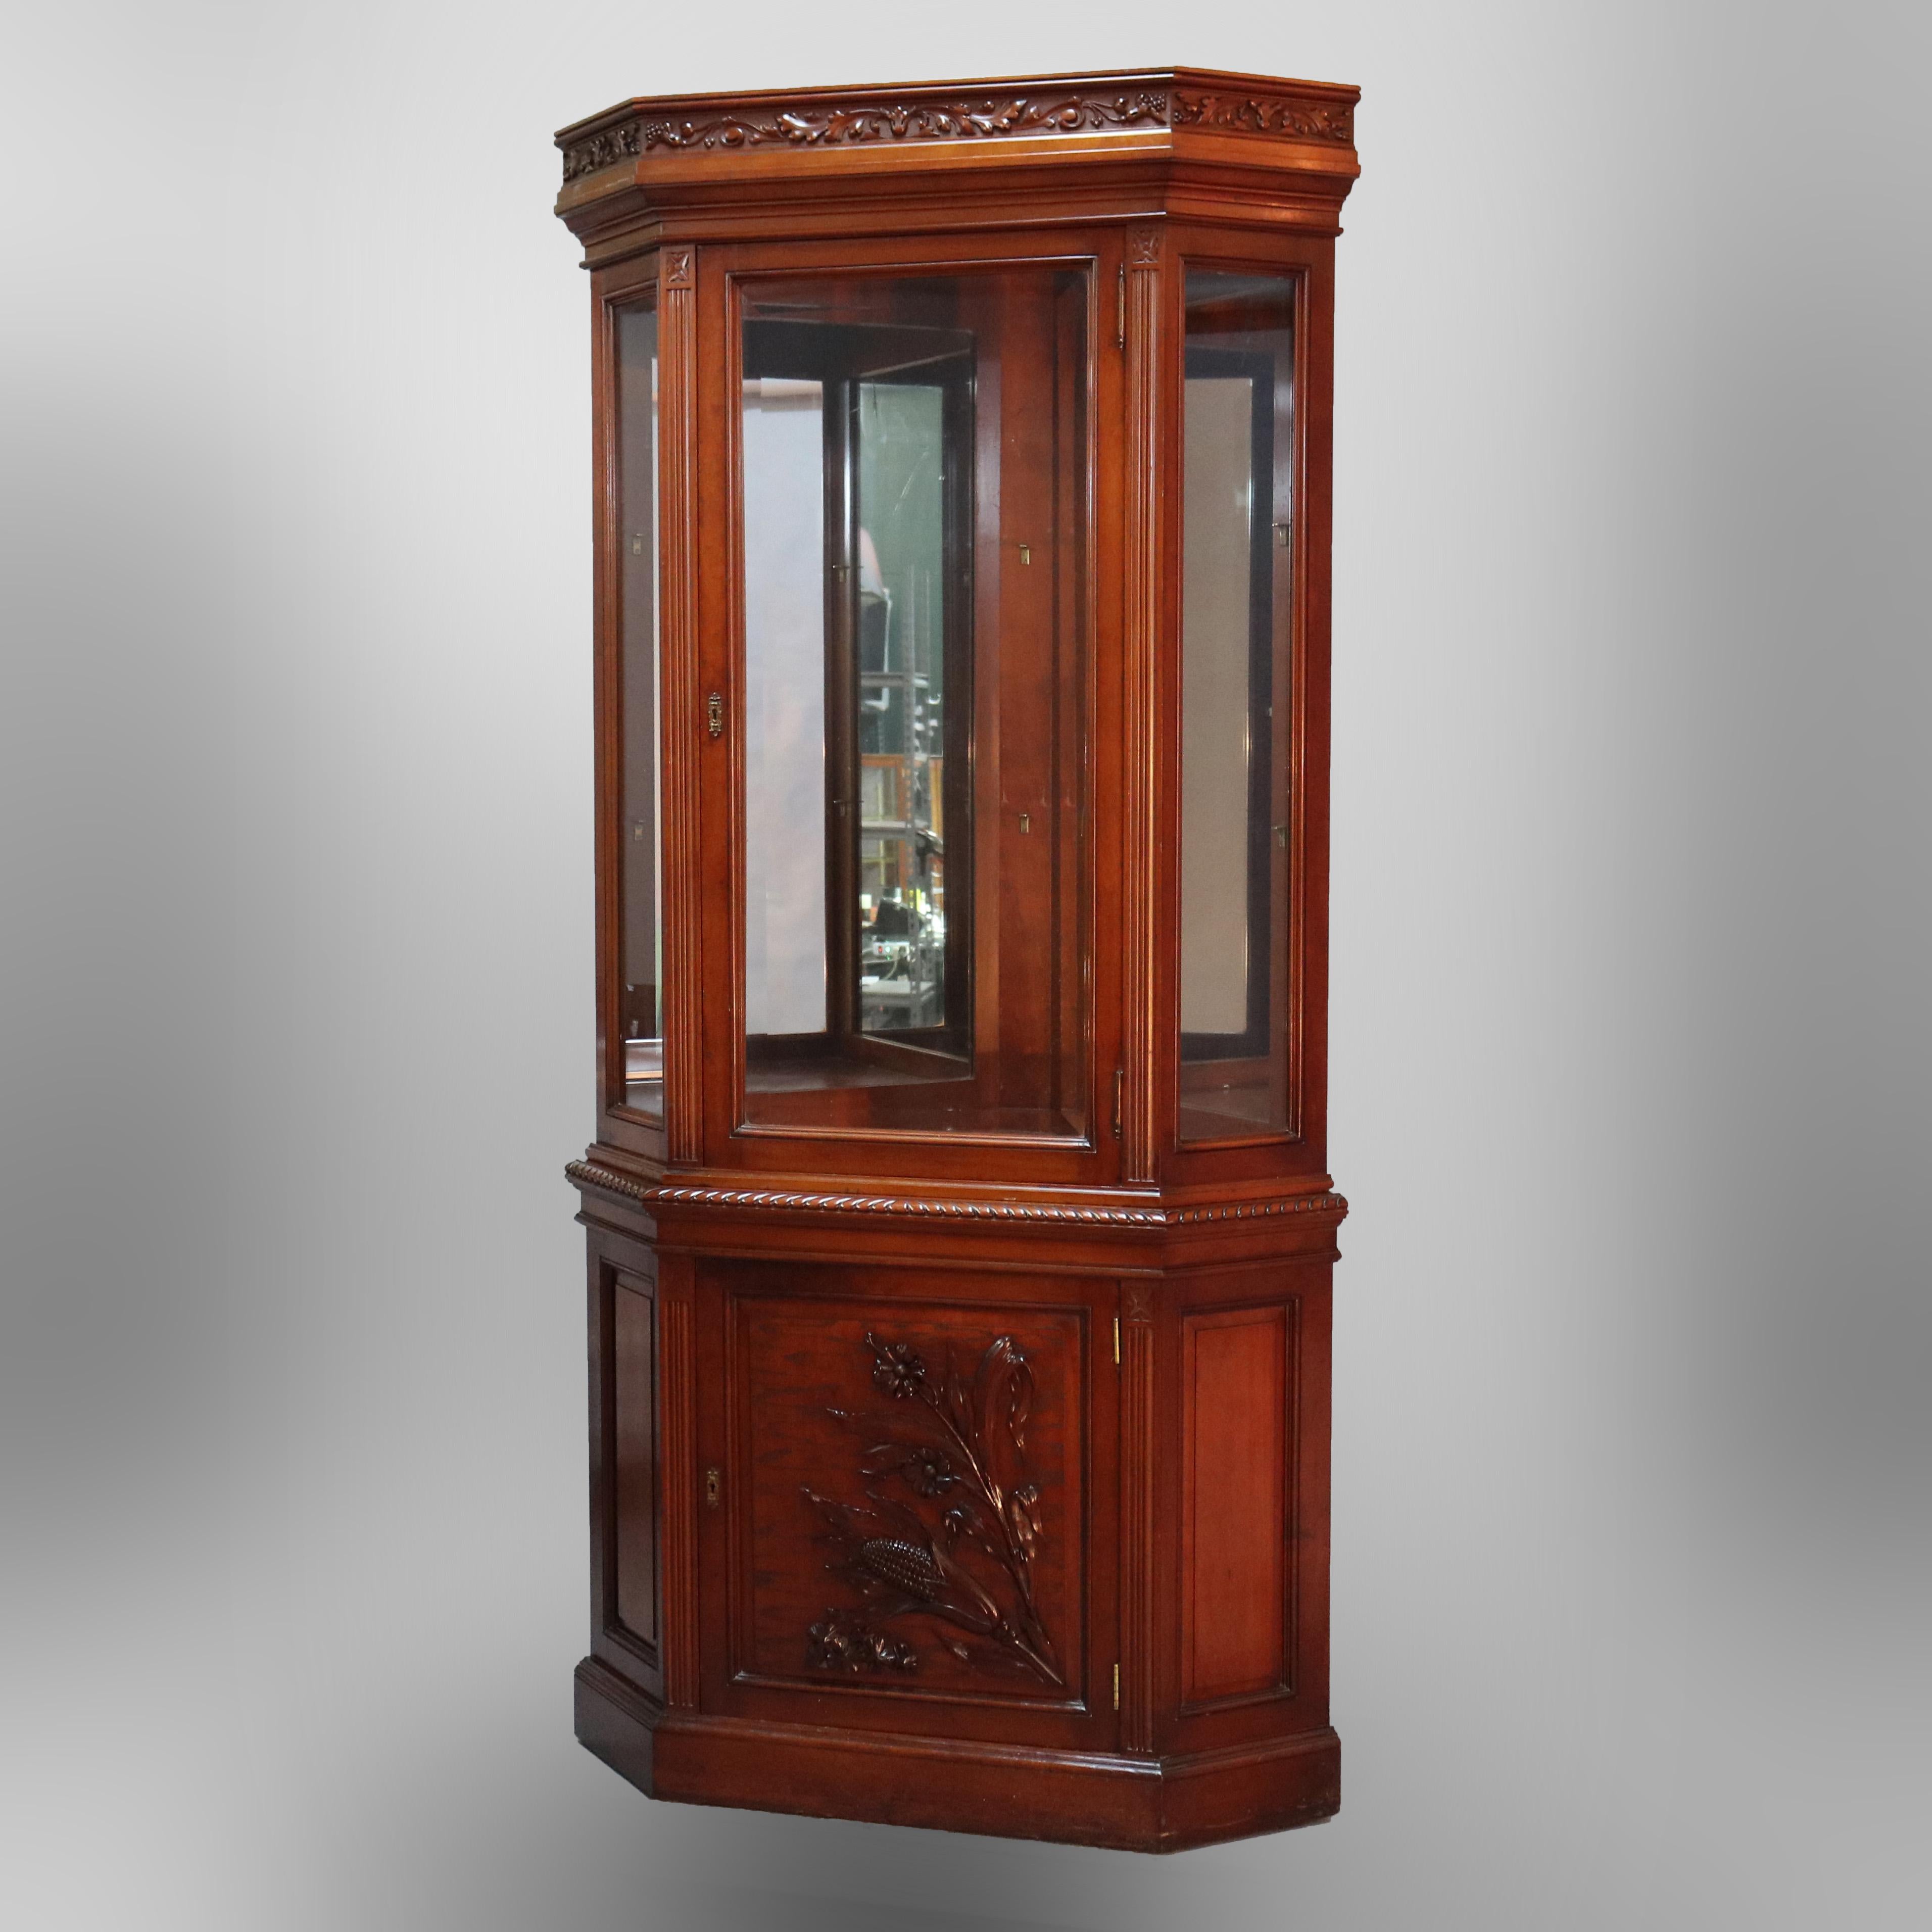 Antique Aesthetic Movement Carved Cherry Faceted & Mirrored Corner Cabinet c1890 For Sale 10